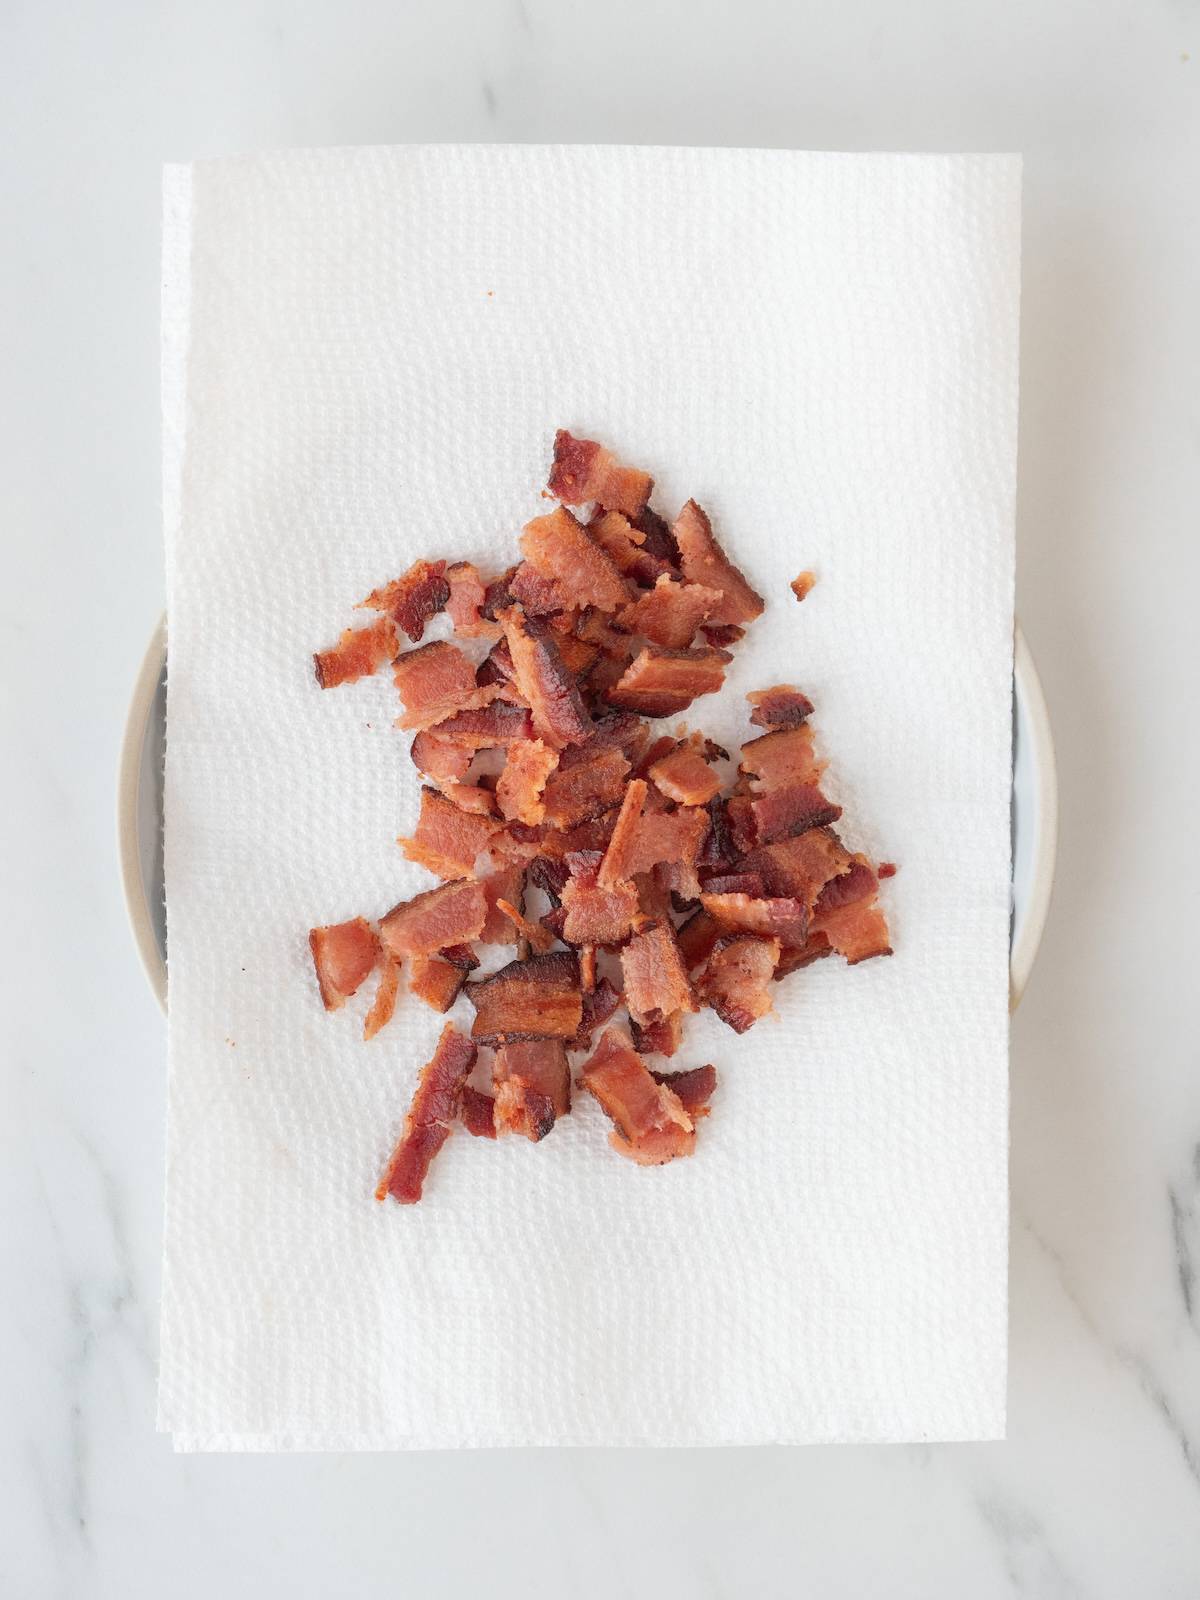 A tissue lined plate with cooked bacon, broken into bite sized pieces.